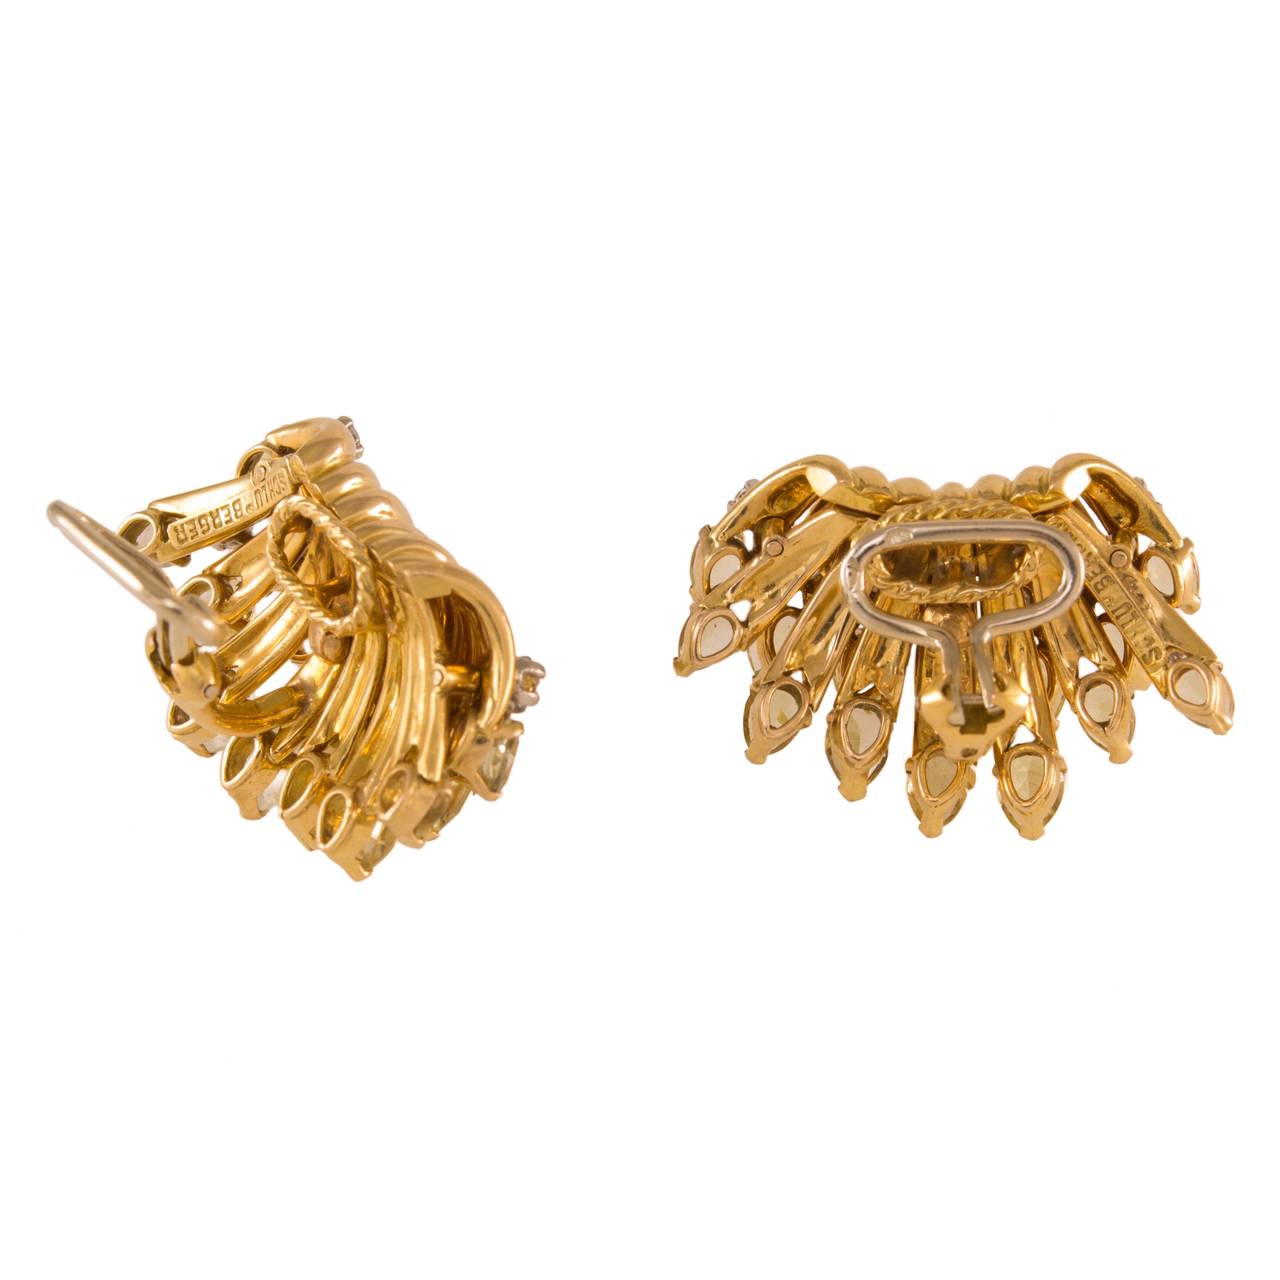 A pair of 18k gold earclips designed by Jean Schlumberger circa 1950. The earrings are set with pear-shaped yellow tourmalines and round diamonds. French marks and signed.